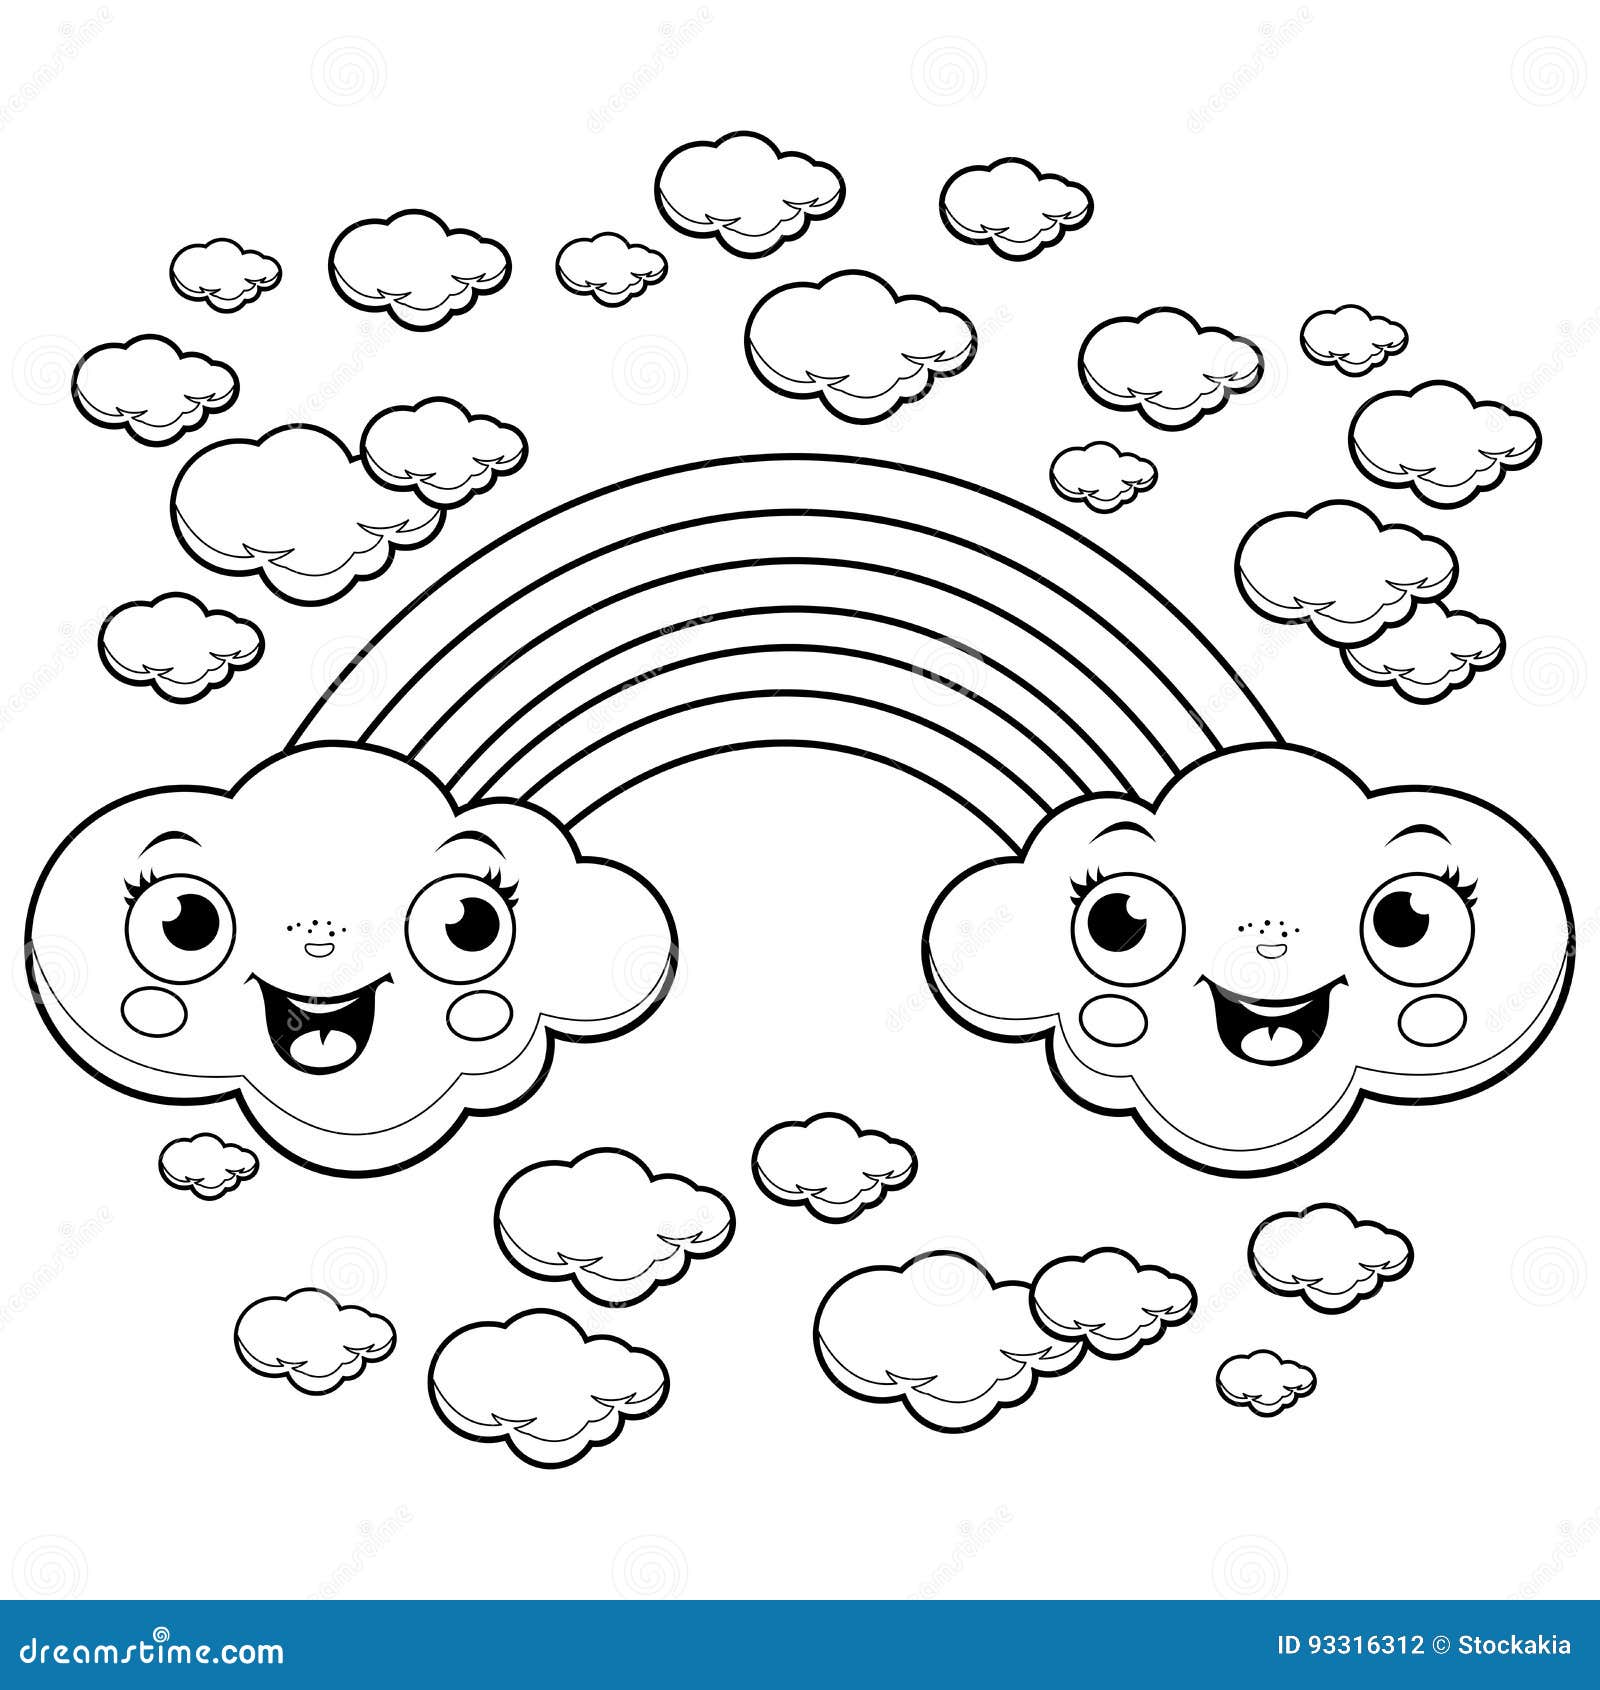  Rainbow  Cloud  Characters Coloring  Page  Stock Vector 